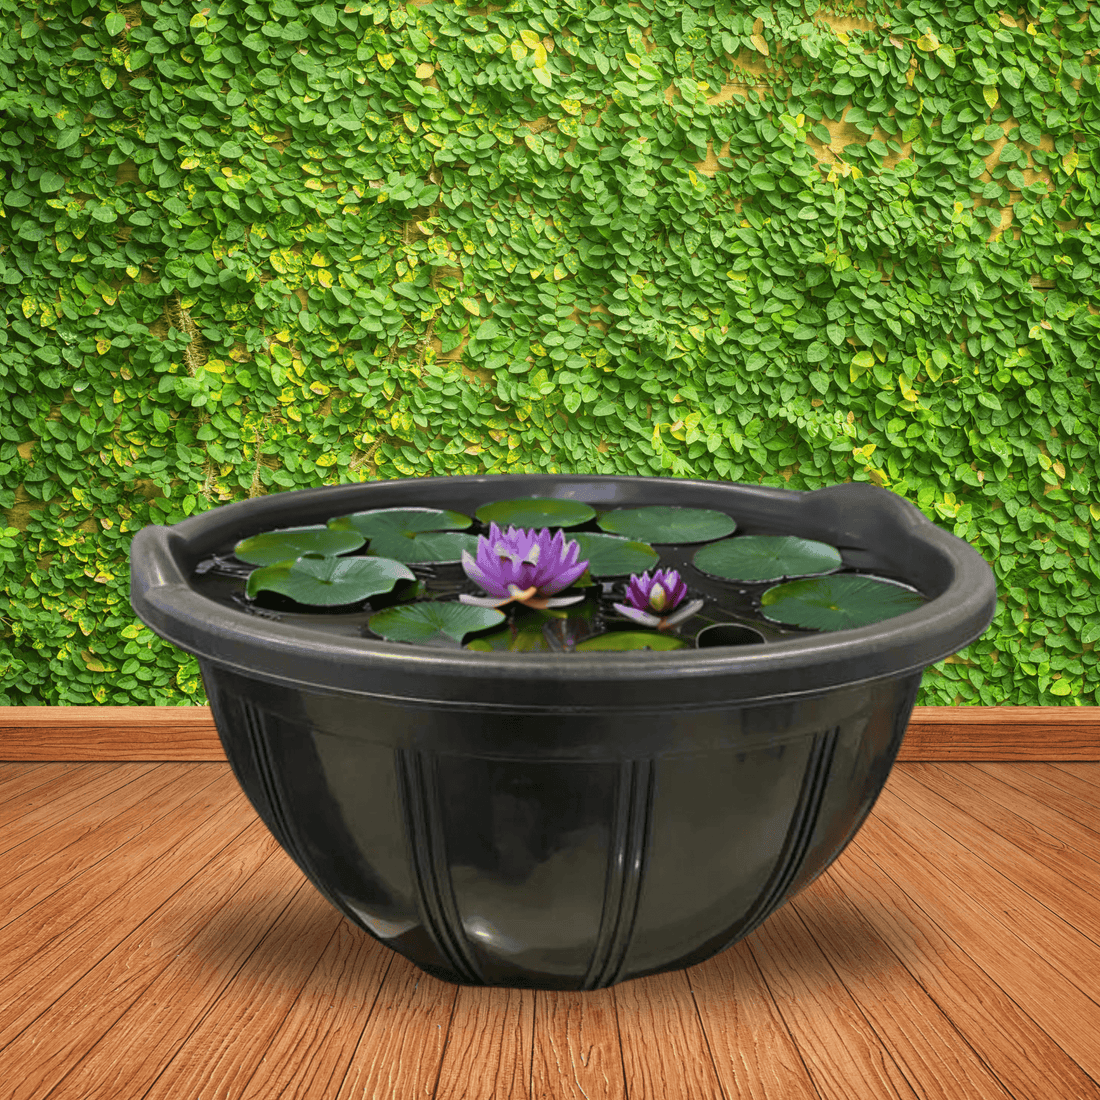 Plastic Bowl for Bowl Lotus and Water Lily